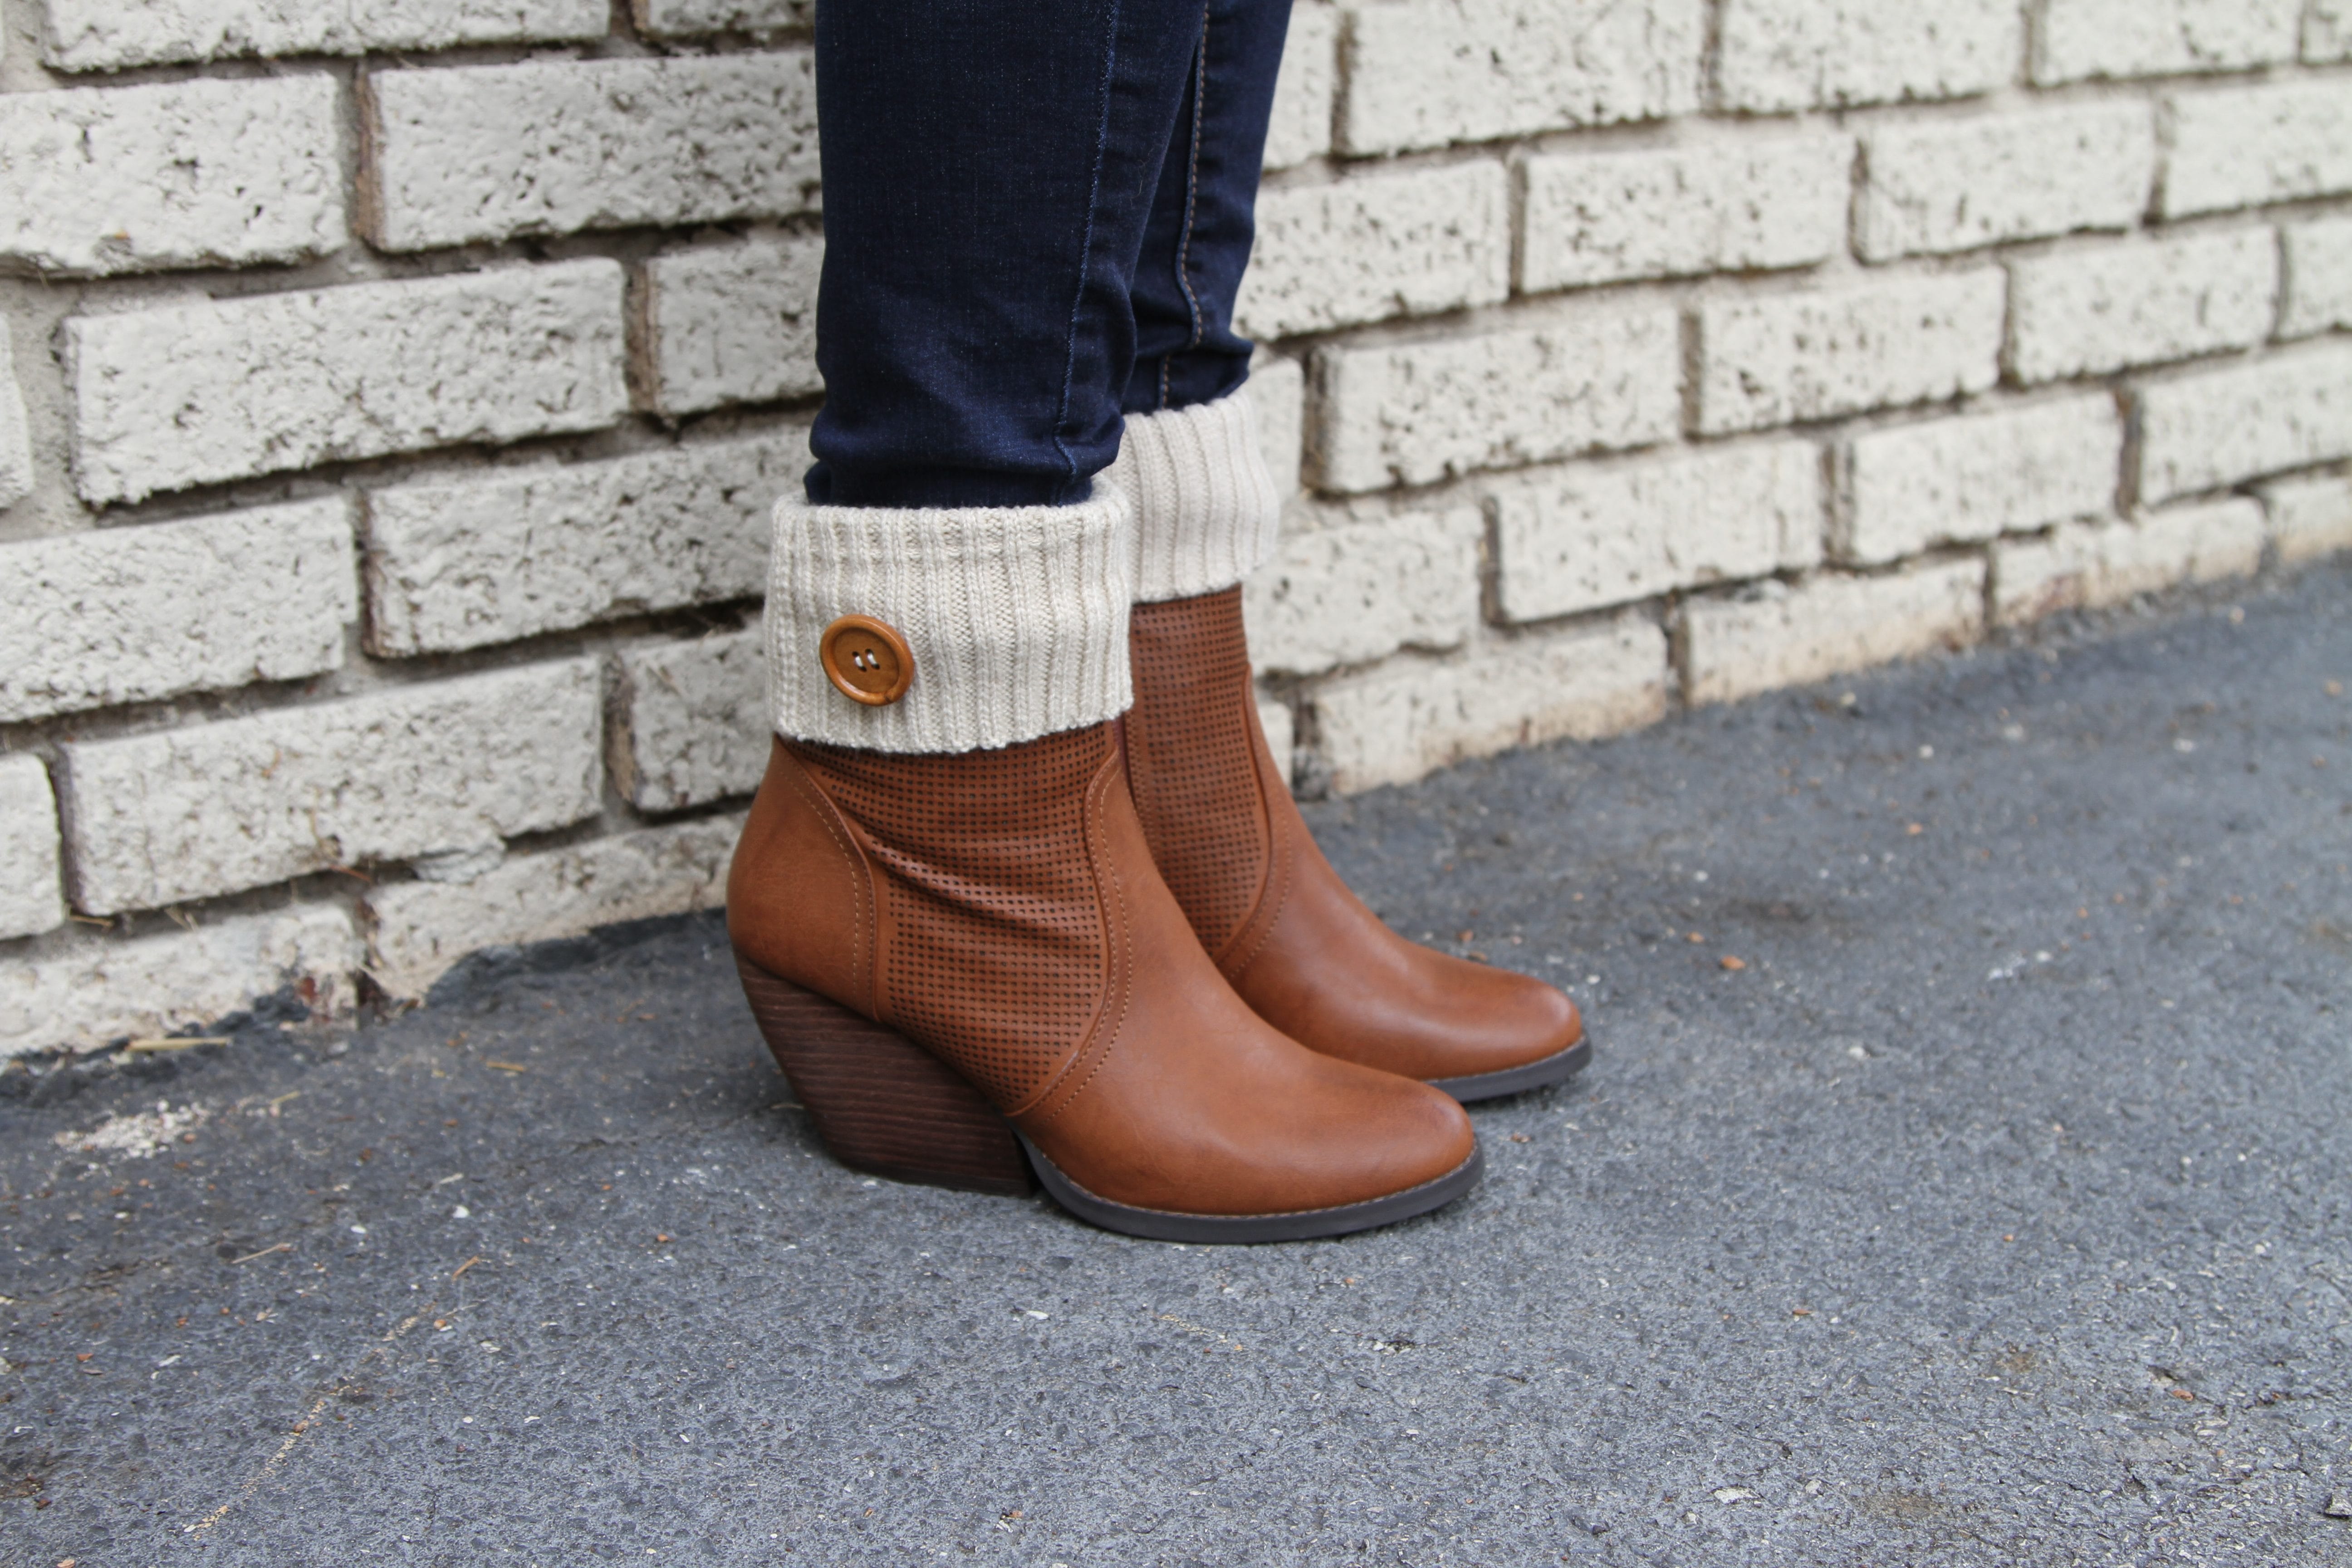 socks with ankle boots